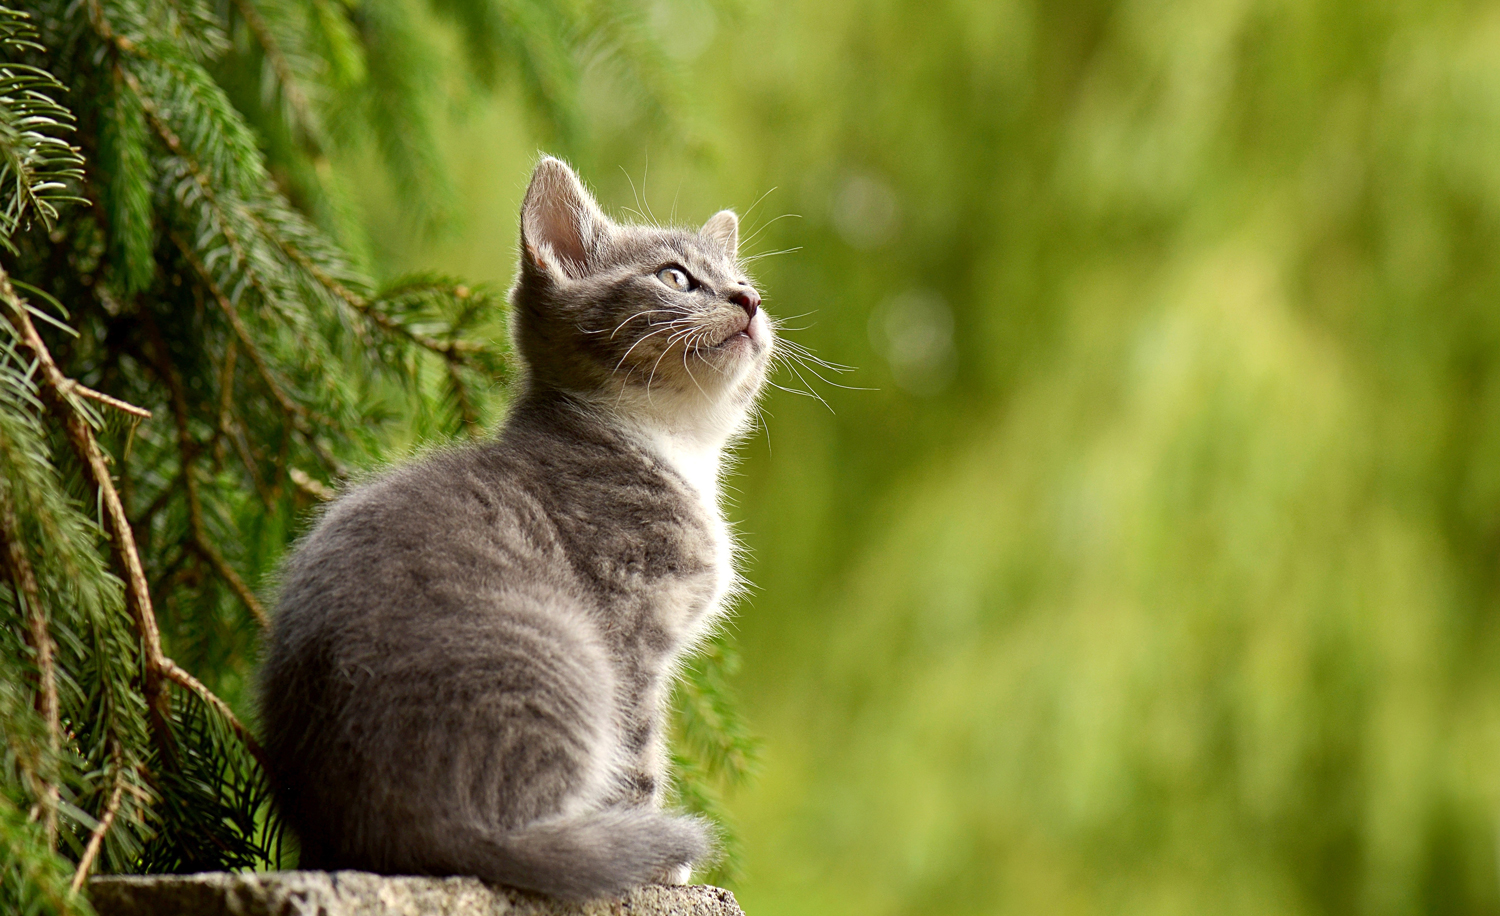 A cat sitting on top of a vantage point in a green garden